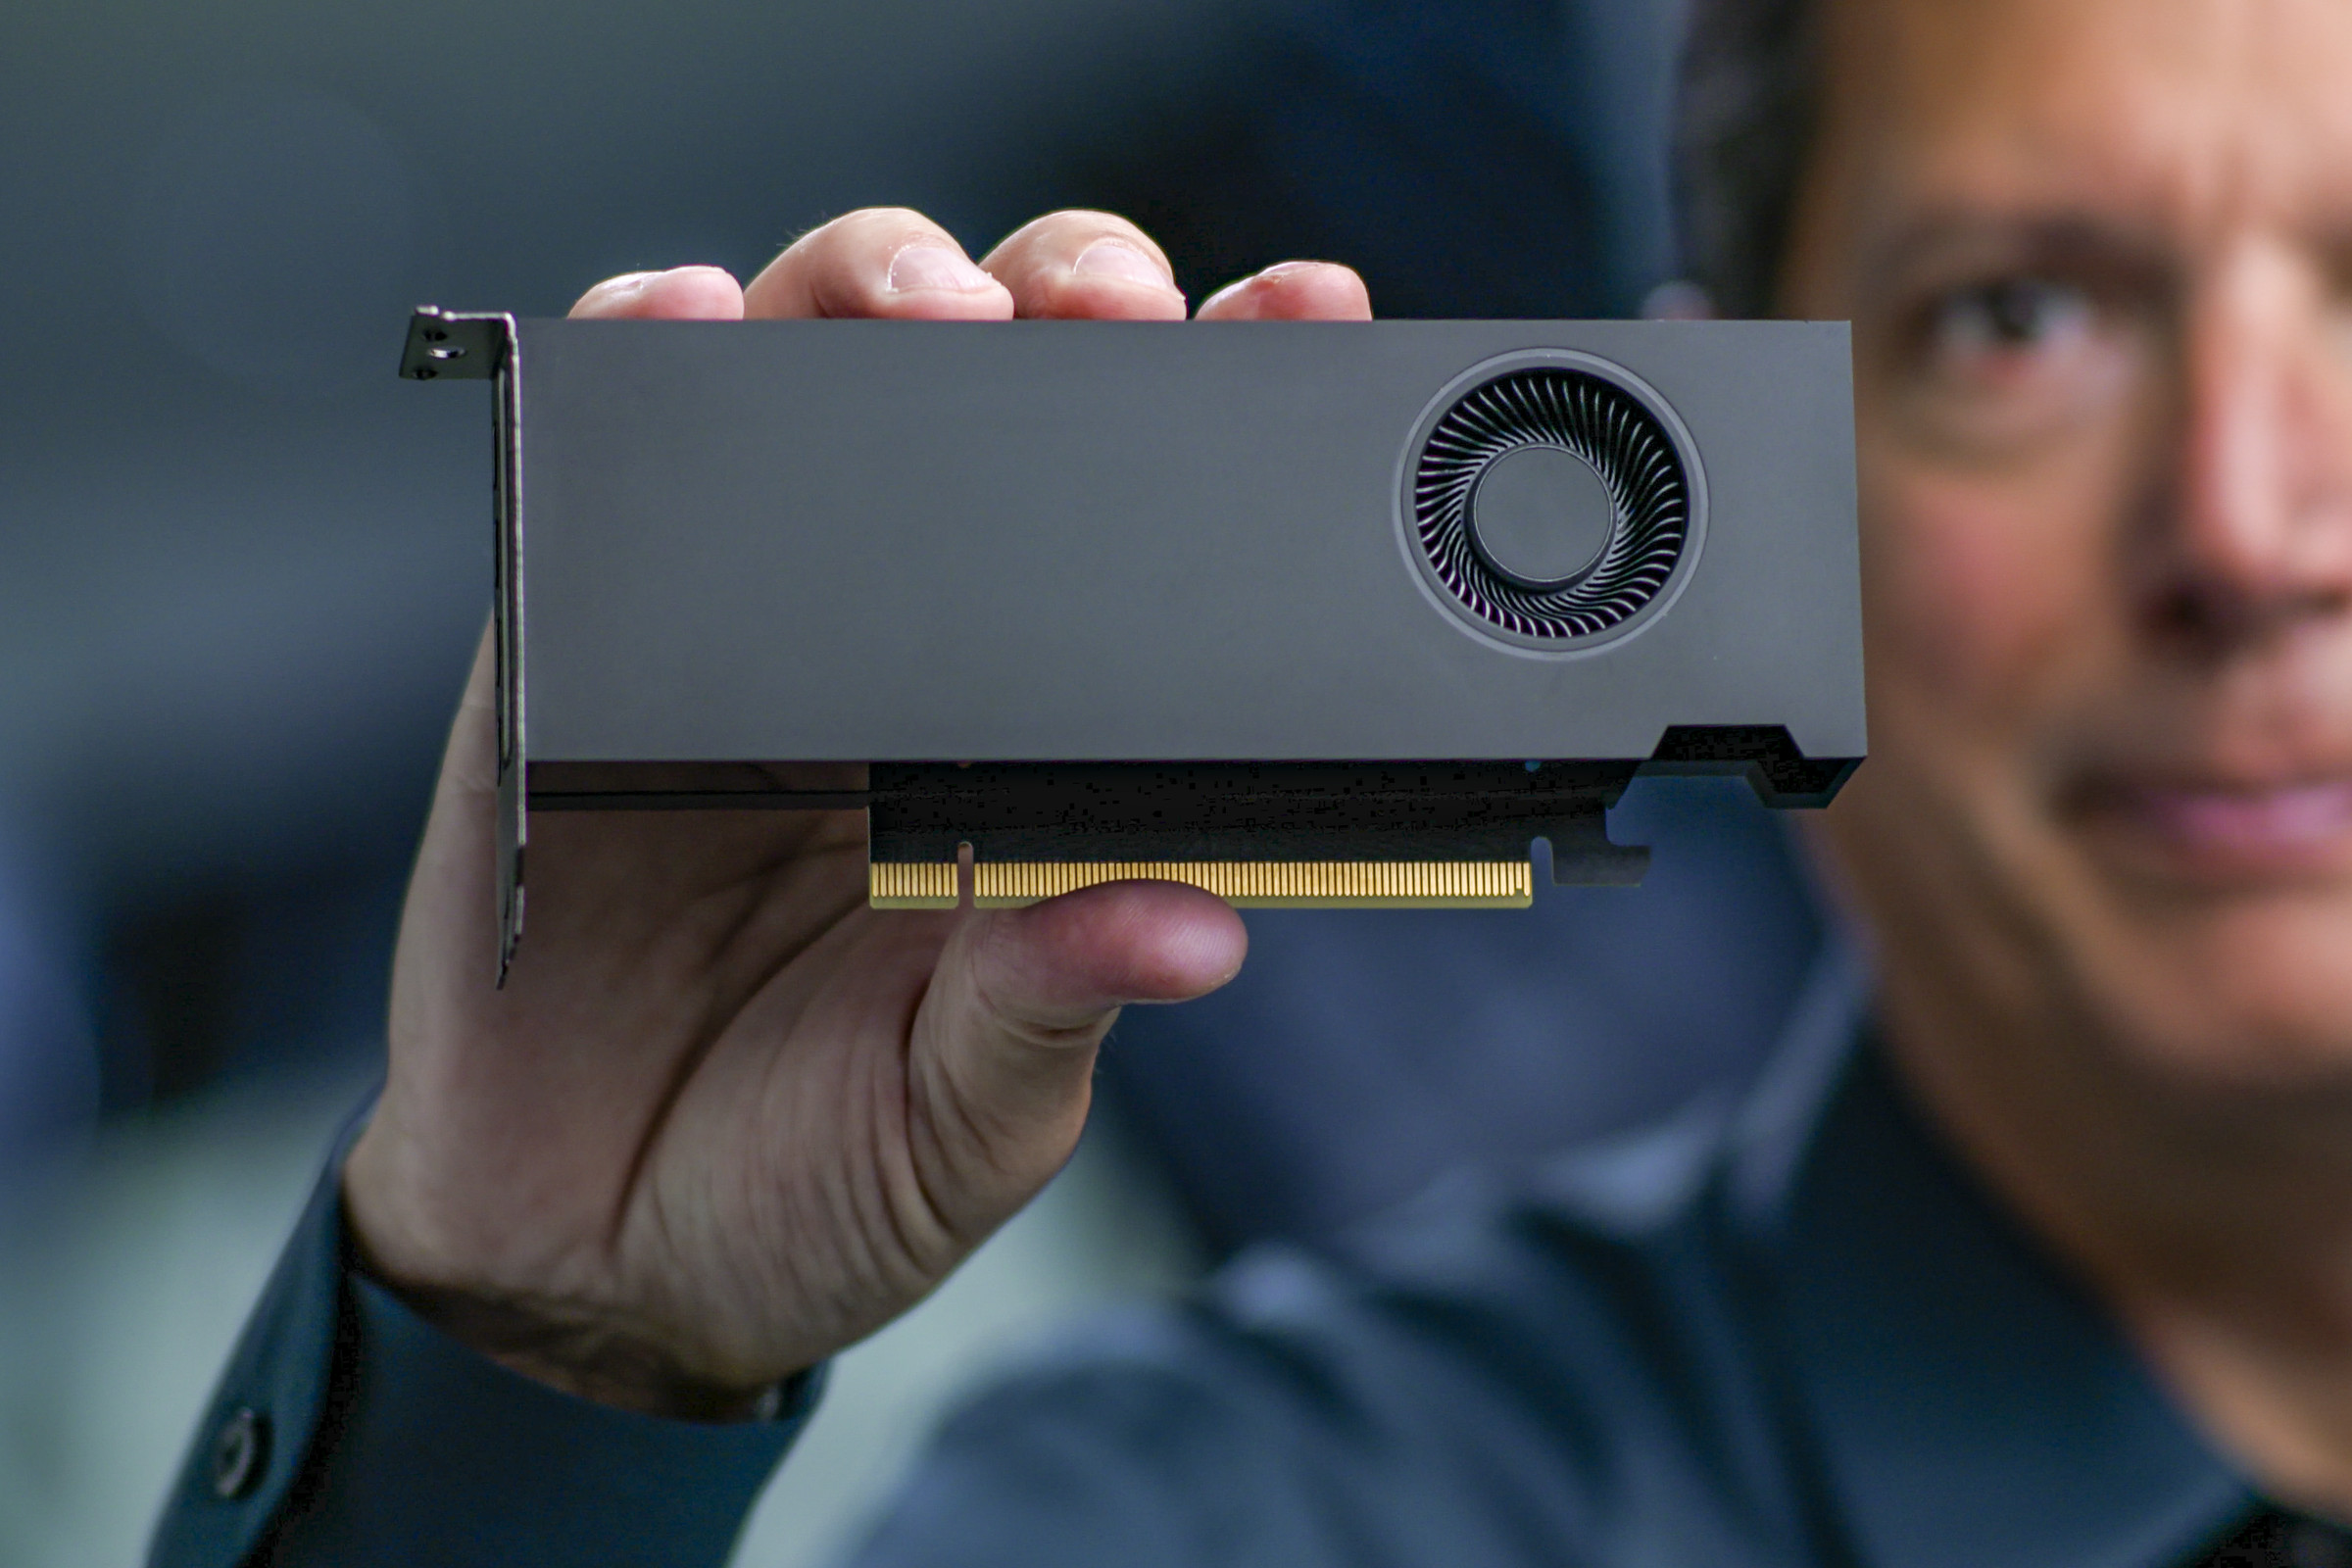 Nvidia’s RTX A2000 is nearly half the size of the RTX 3090.